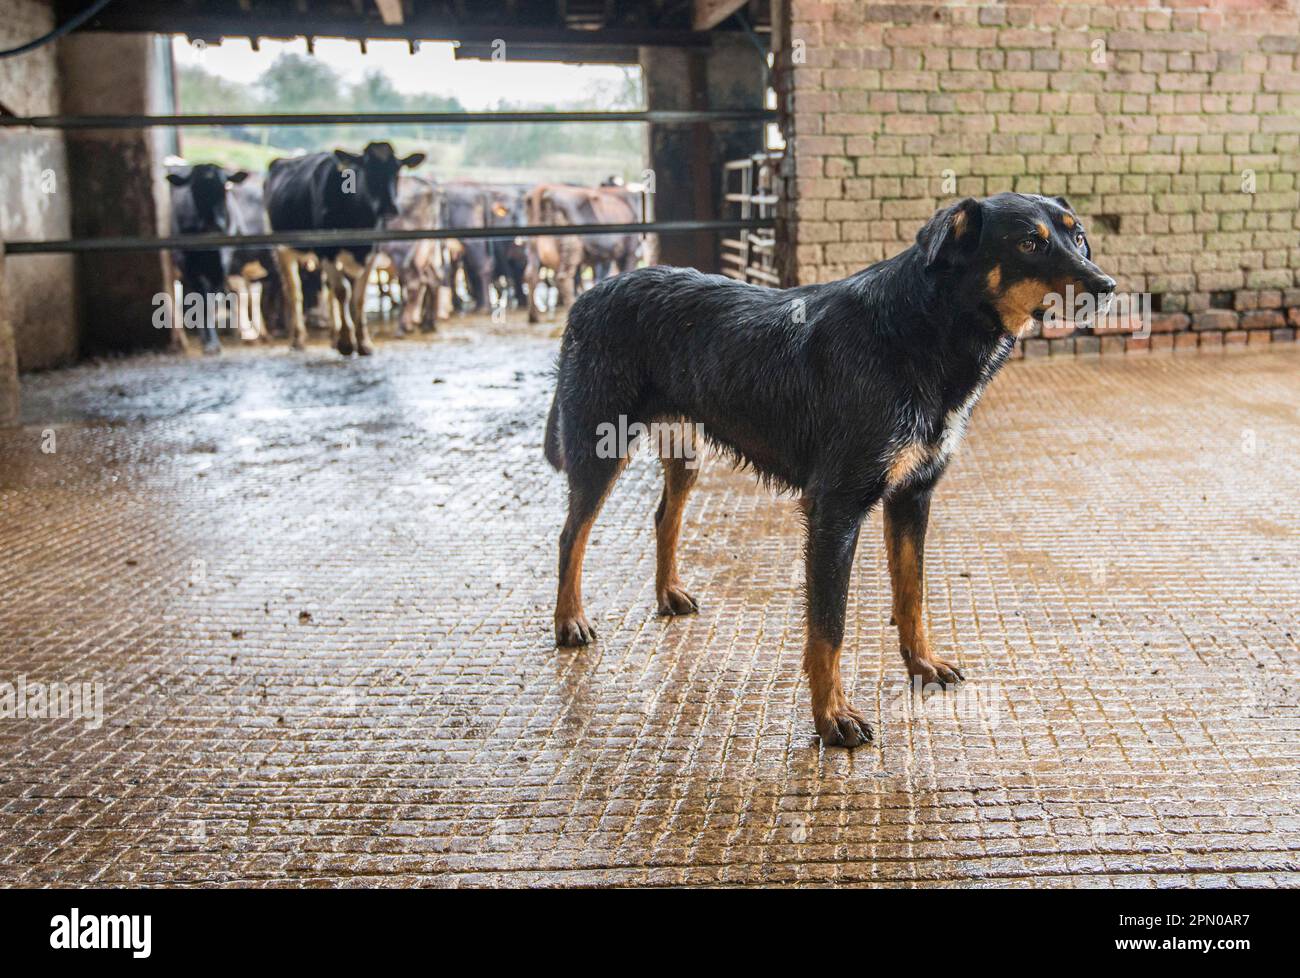 Domestic dog, Huntaway, adult, standing in milking parlour collection yard on farm, Shropshire, England, United Kingdom Stock Photo